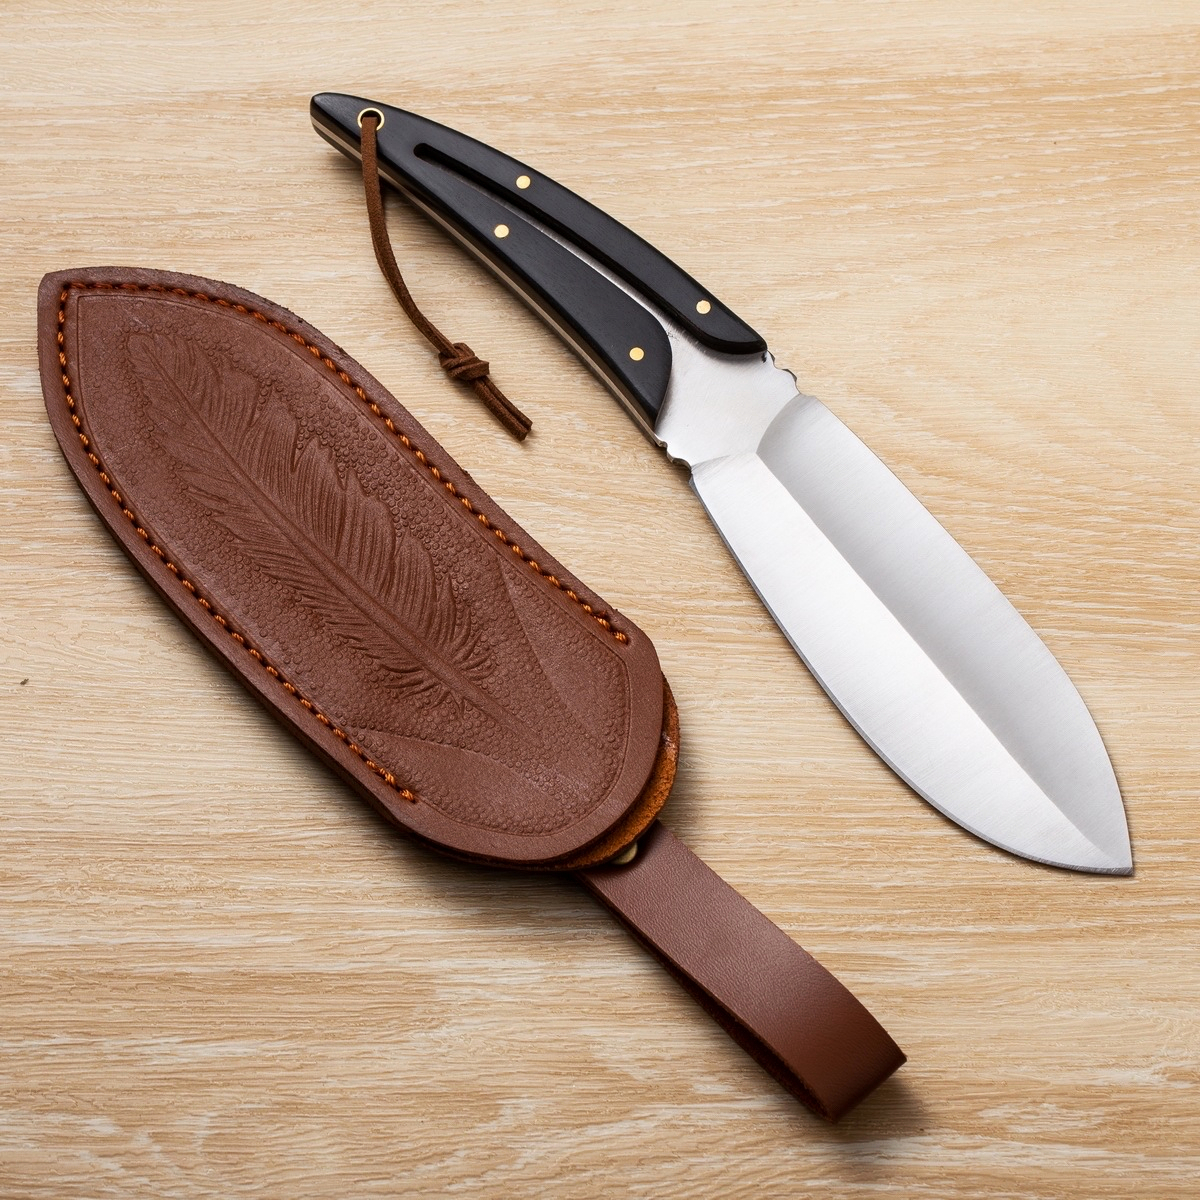 Top Quality R8341 Outdoor Survival Straight Knife 5Cr15Mov Satin Blade Full Tang Wood Handle Fixed Blade Knives with Leather Sheath